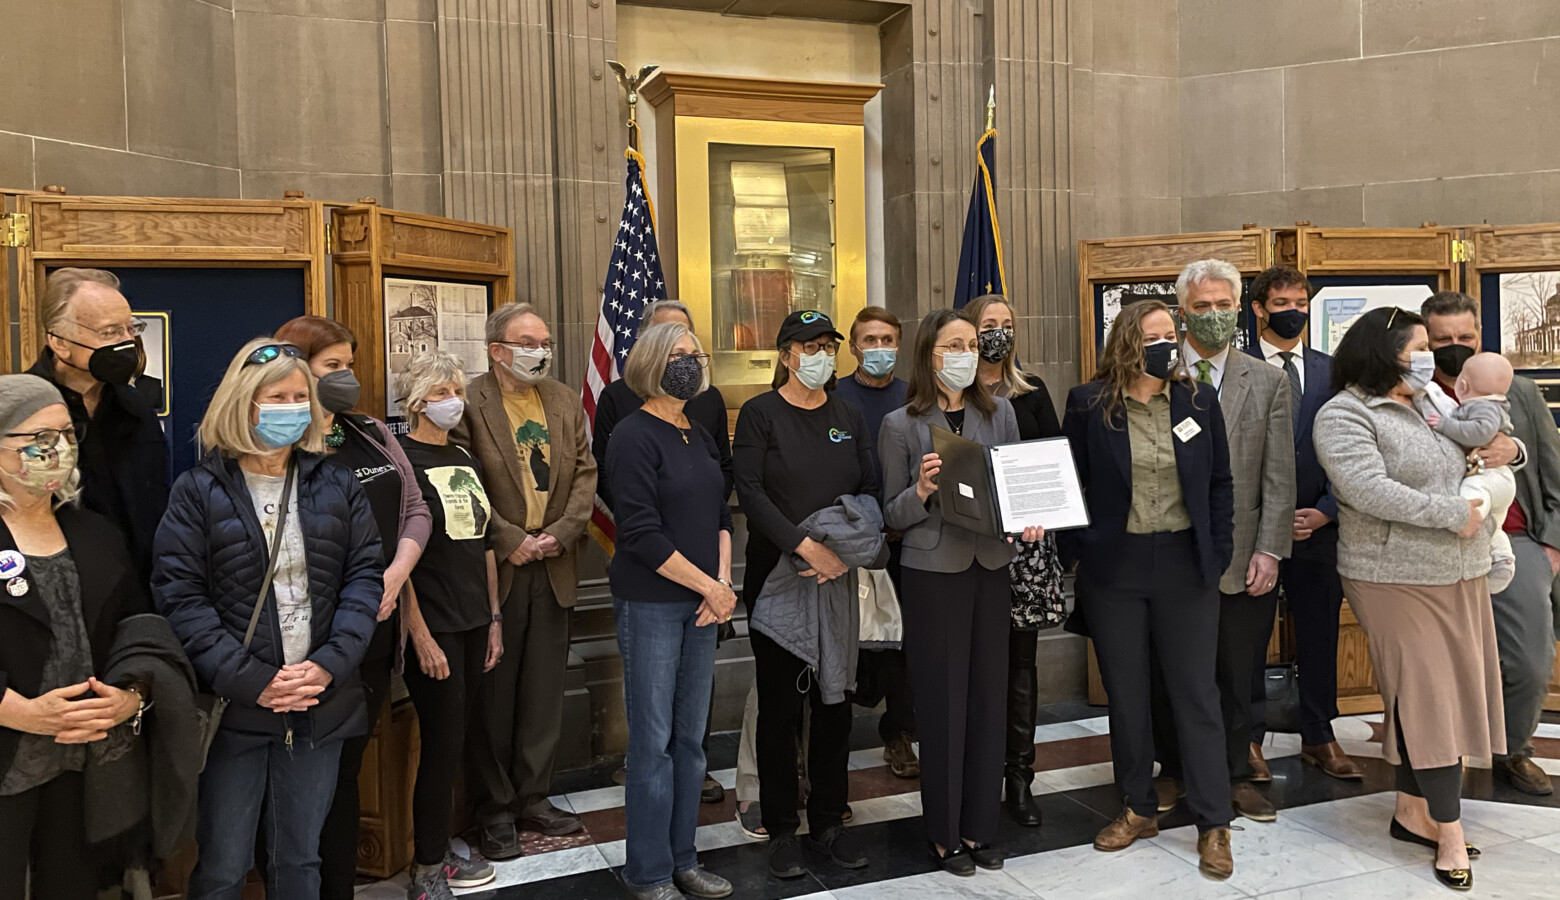 Members of the coalition with their letter asking Gov. Eric Holcomb to veto the wetlands bill. (Courtesy of The Nature Conservancy)